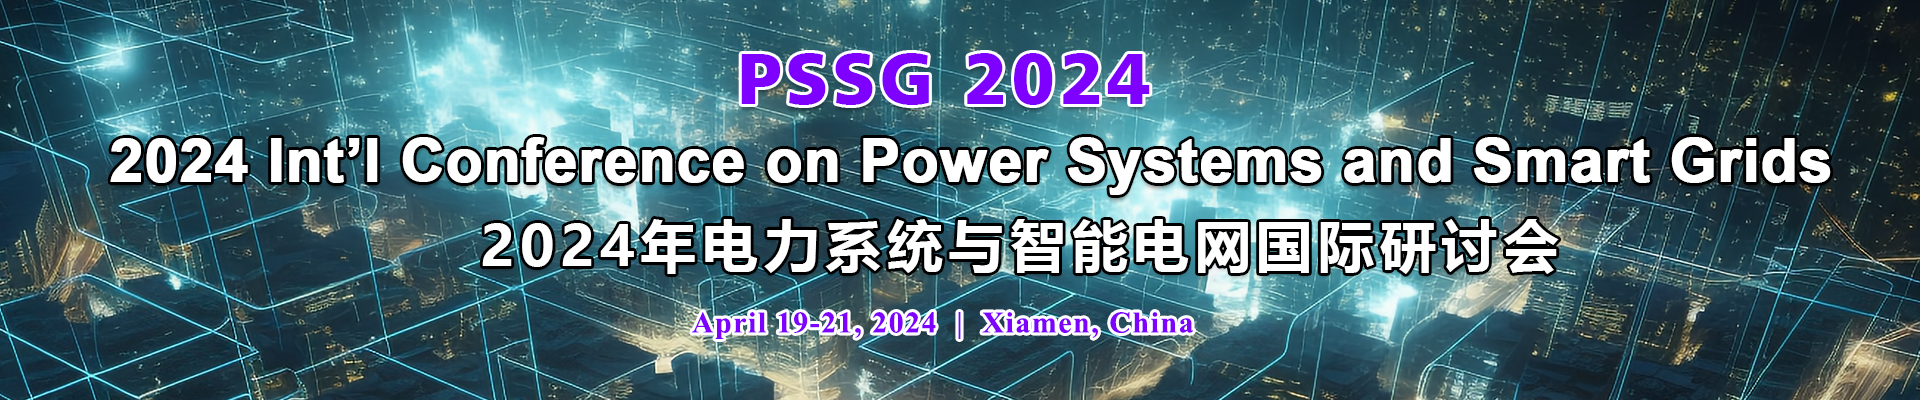 2024 Int’l Conference on Power Systems and Smart Grids (PSSG 2024), Xiamen, Fujian, China